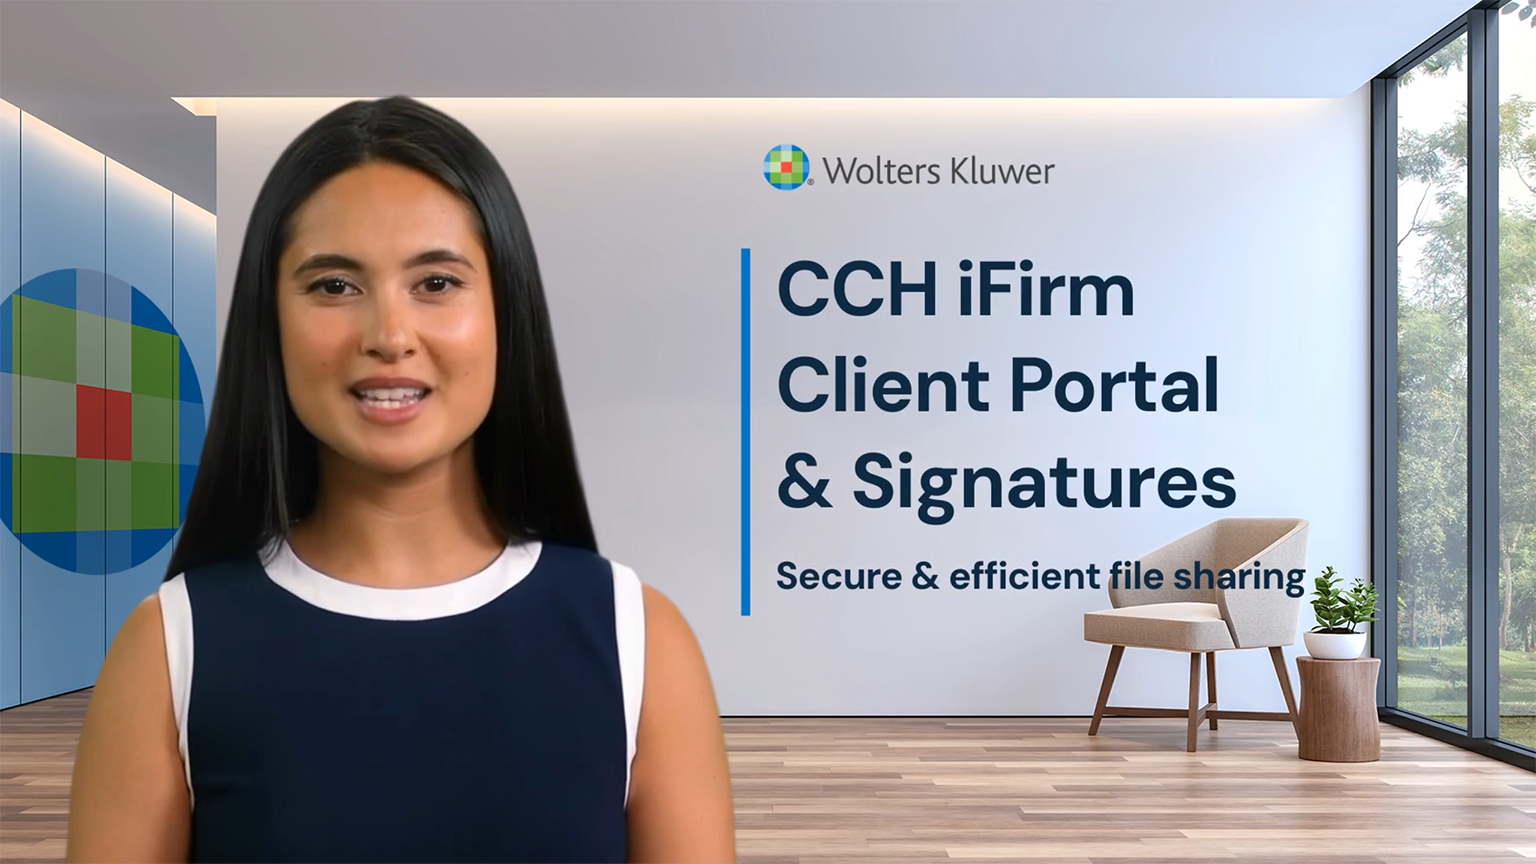 Screenshot of CCH iFirm Client Portal & Signatures video